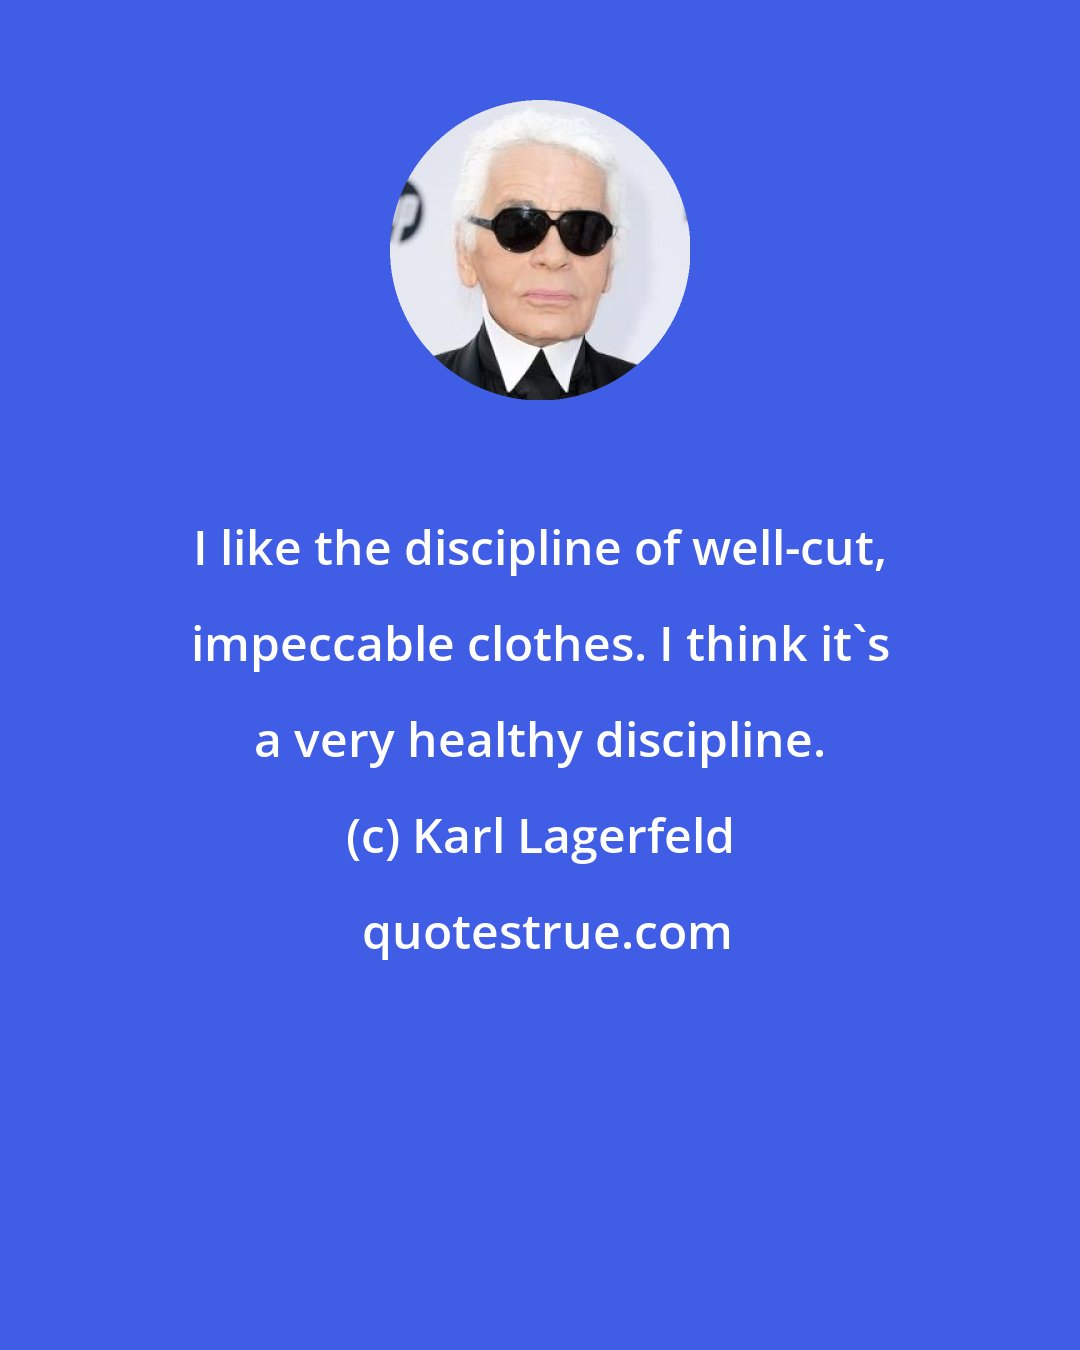 Karl Lagerfeld: I like the discipline of well-cut, impeccable clothes. I think it's a very healthy discipline.